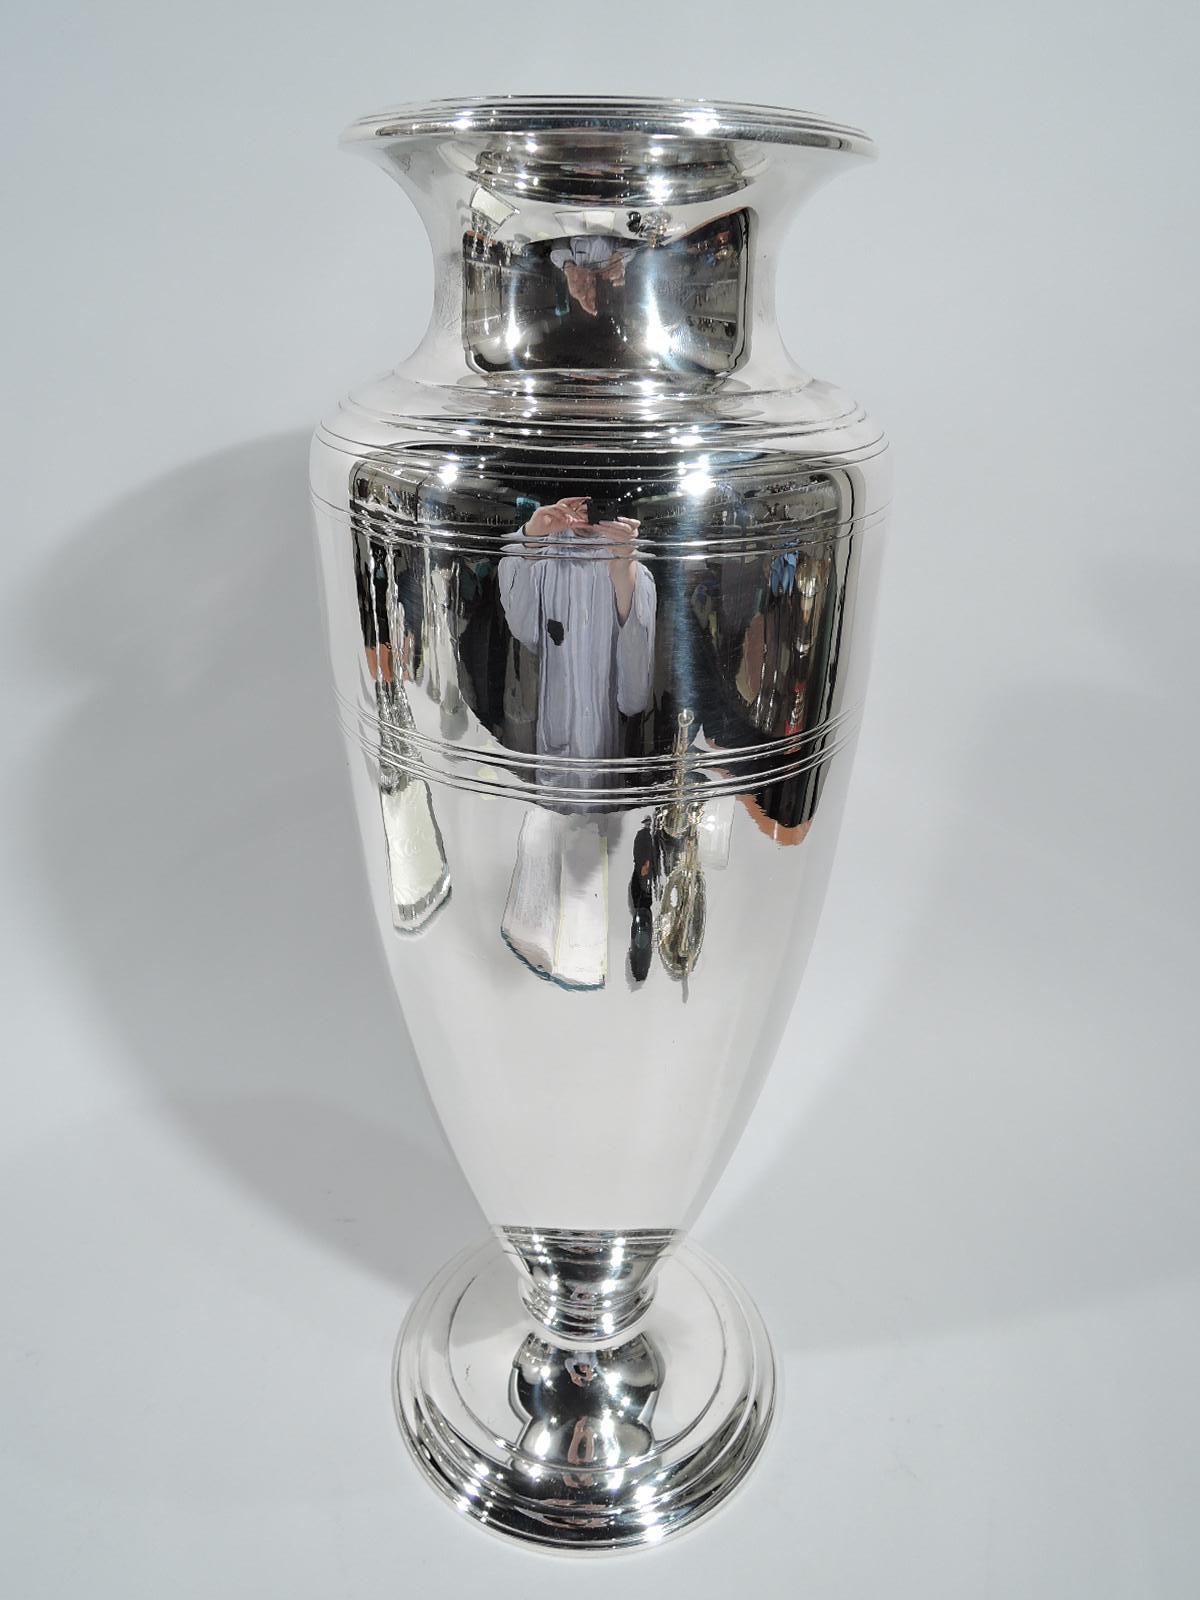 Tall Art Deco Classical sterling silver vase. Made by Tiffany & Co. in New York, circa 1927. Curved and tapering with spool neck and reeded rim, discreet base knop, and round stepped foot. Spare and graceful with tooled bands. Fully marked including